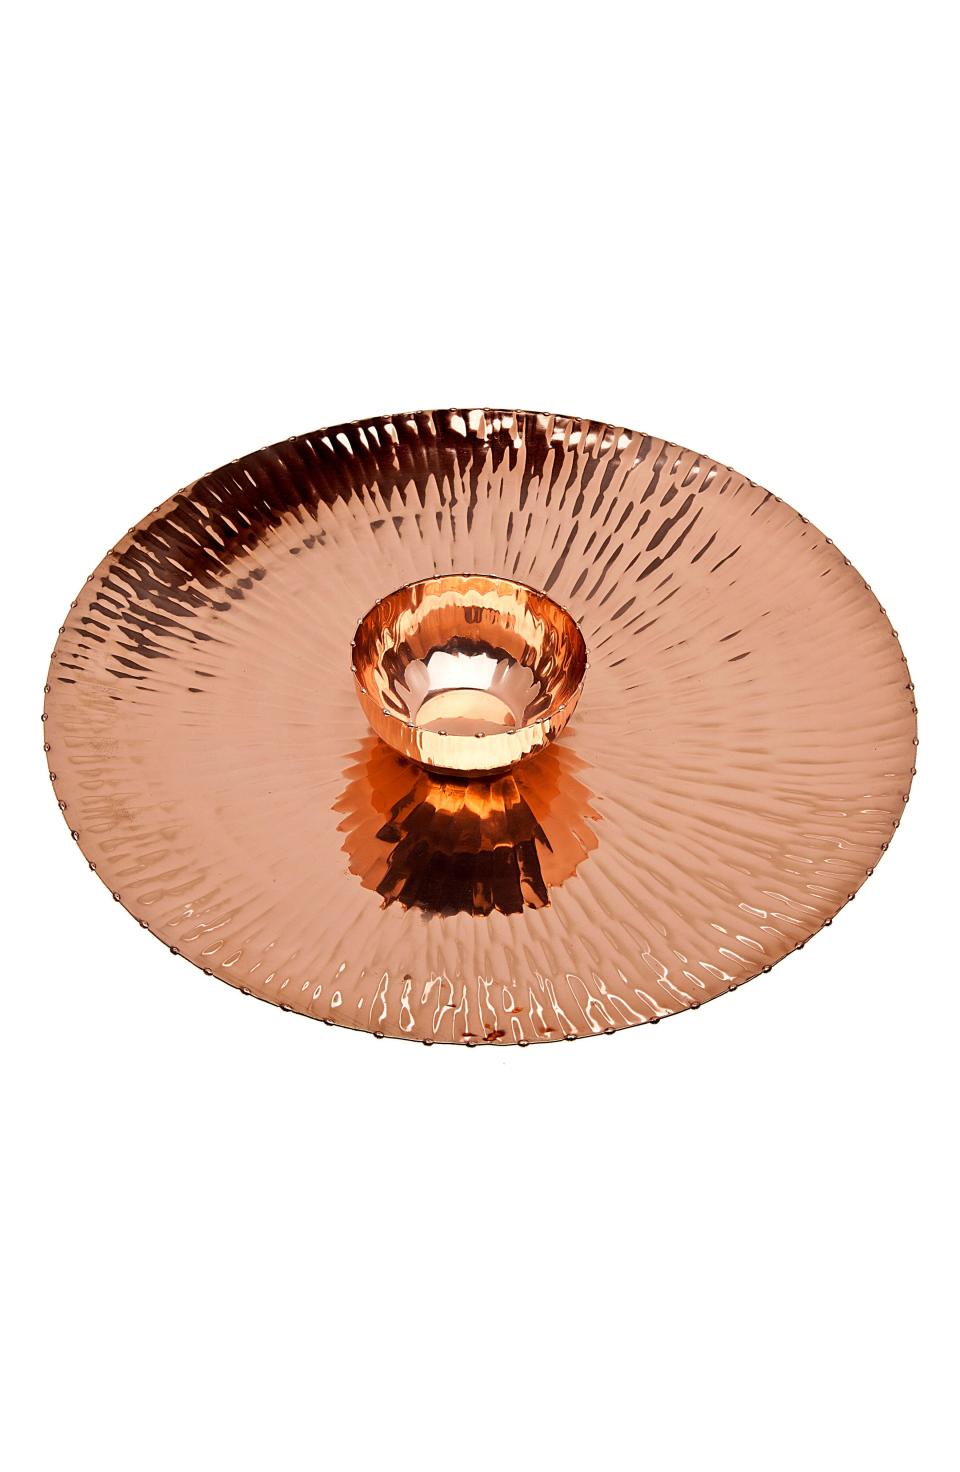 19) Copper Finish Chip and Dip Plate